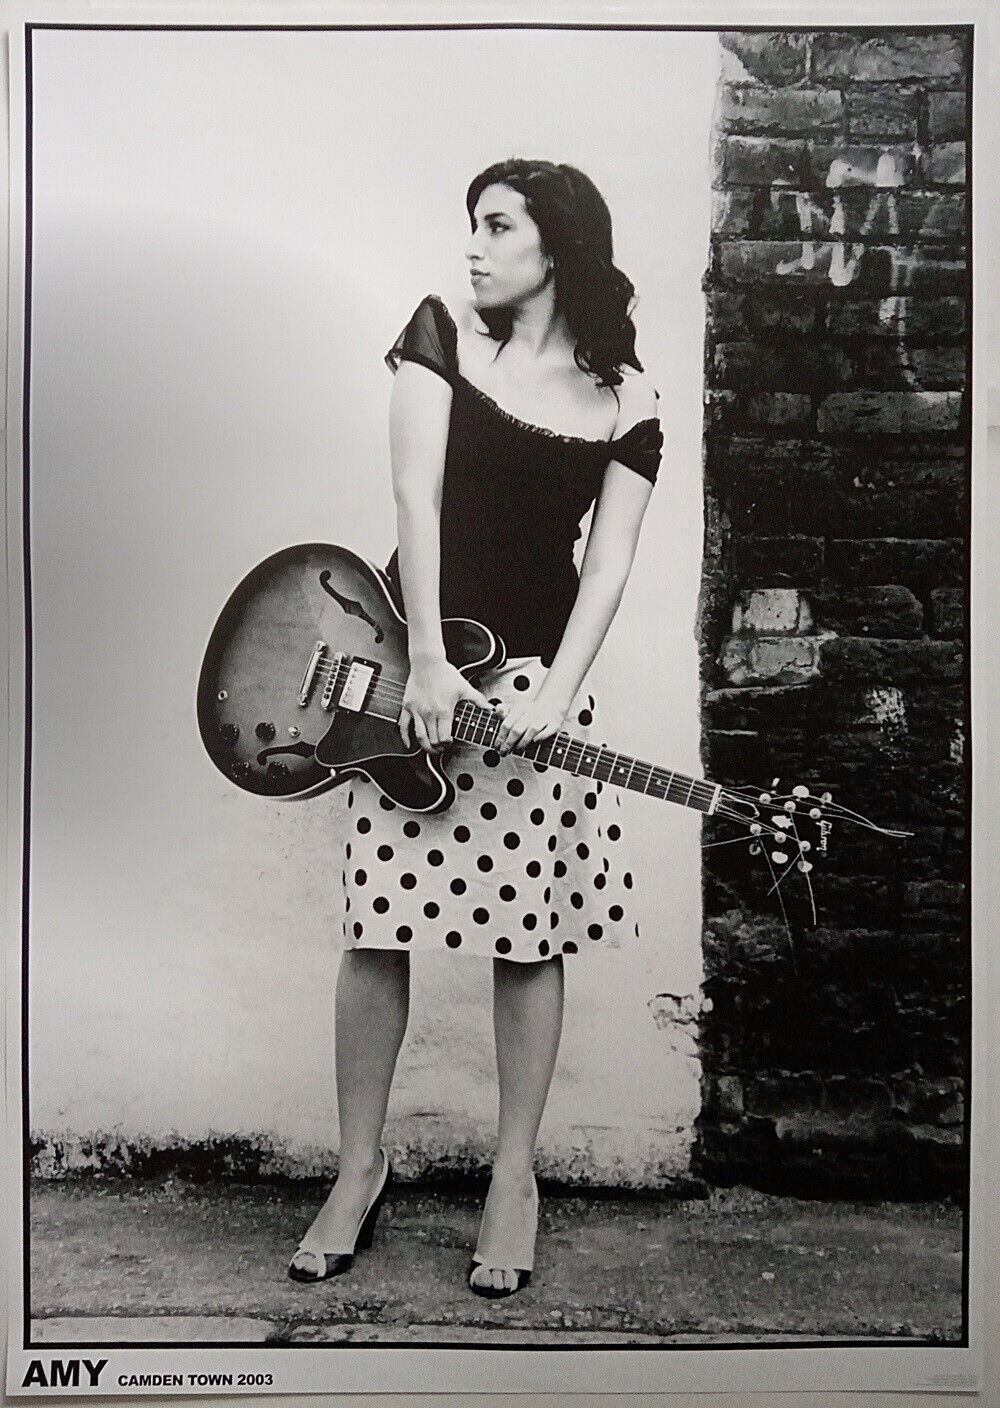 AMY WINEHOUSE Poster Camden Town 2003 With Gibson 335 Guitar